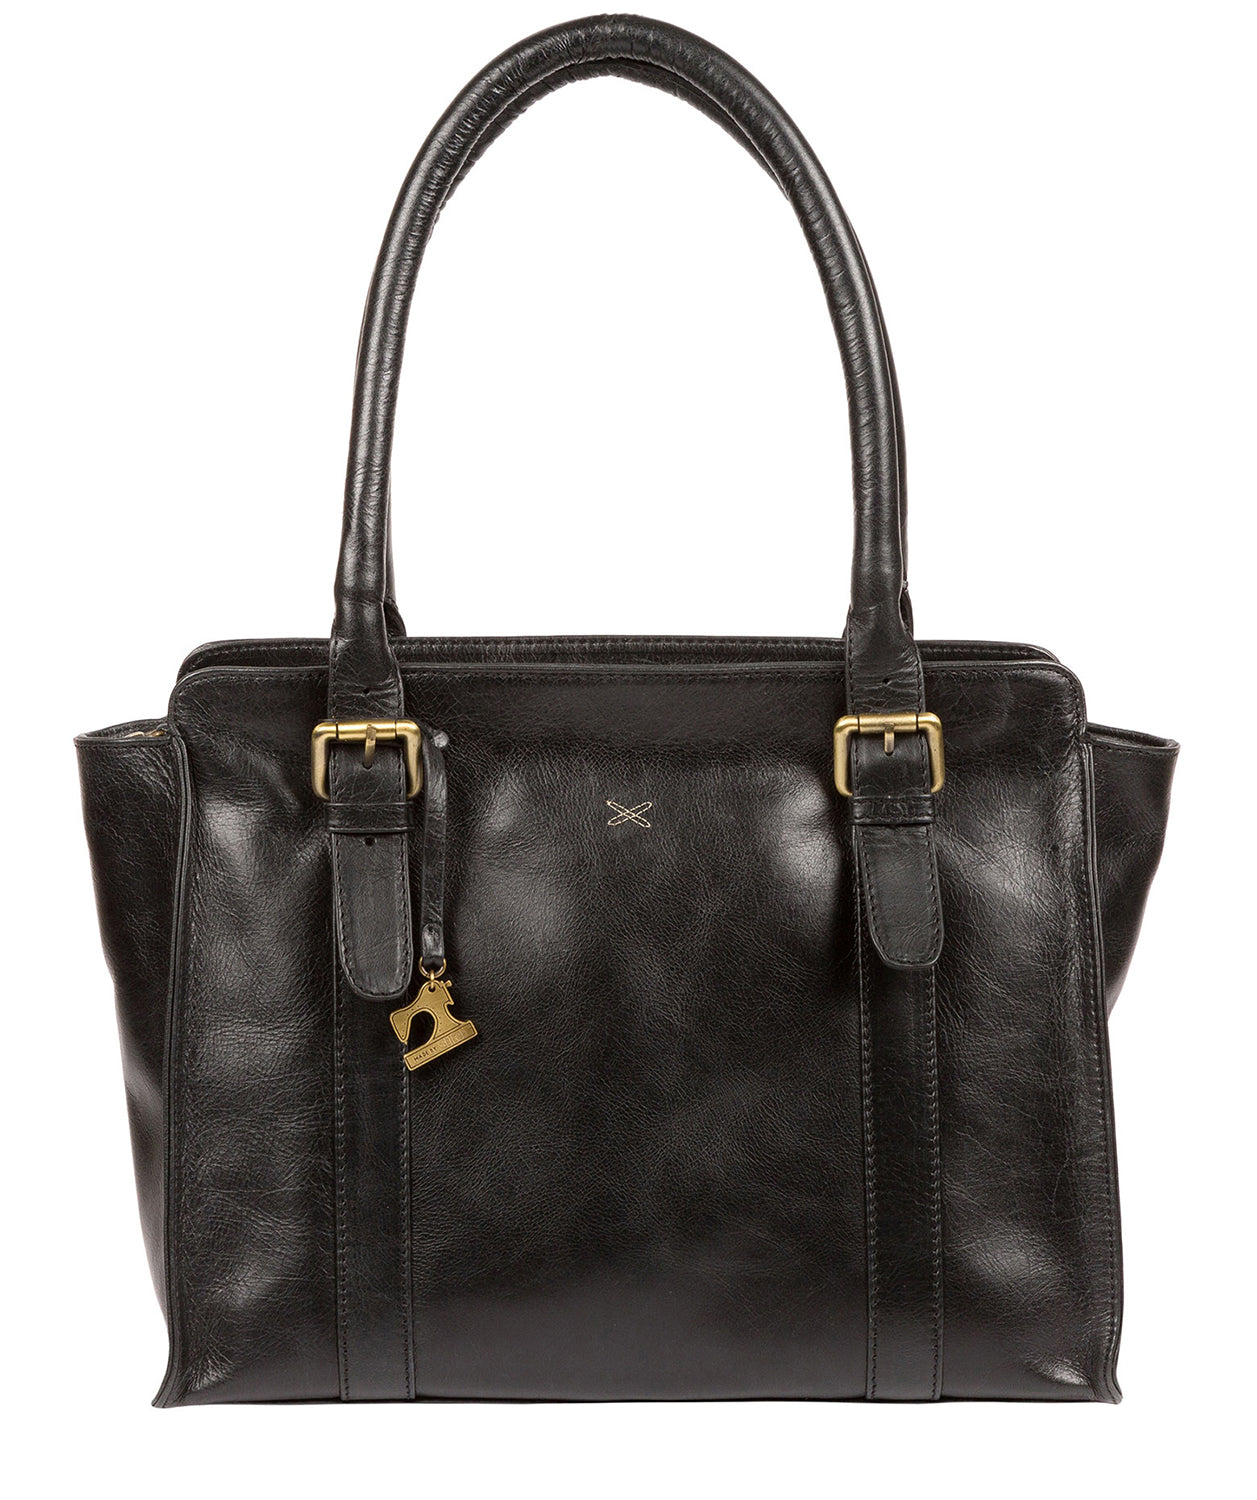 Black Leather Handbag 'Scarlett' by Made By Stitch – Pure Luxuries London